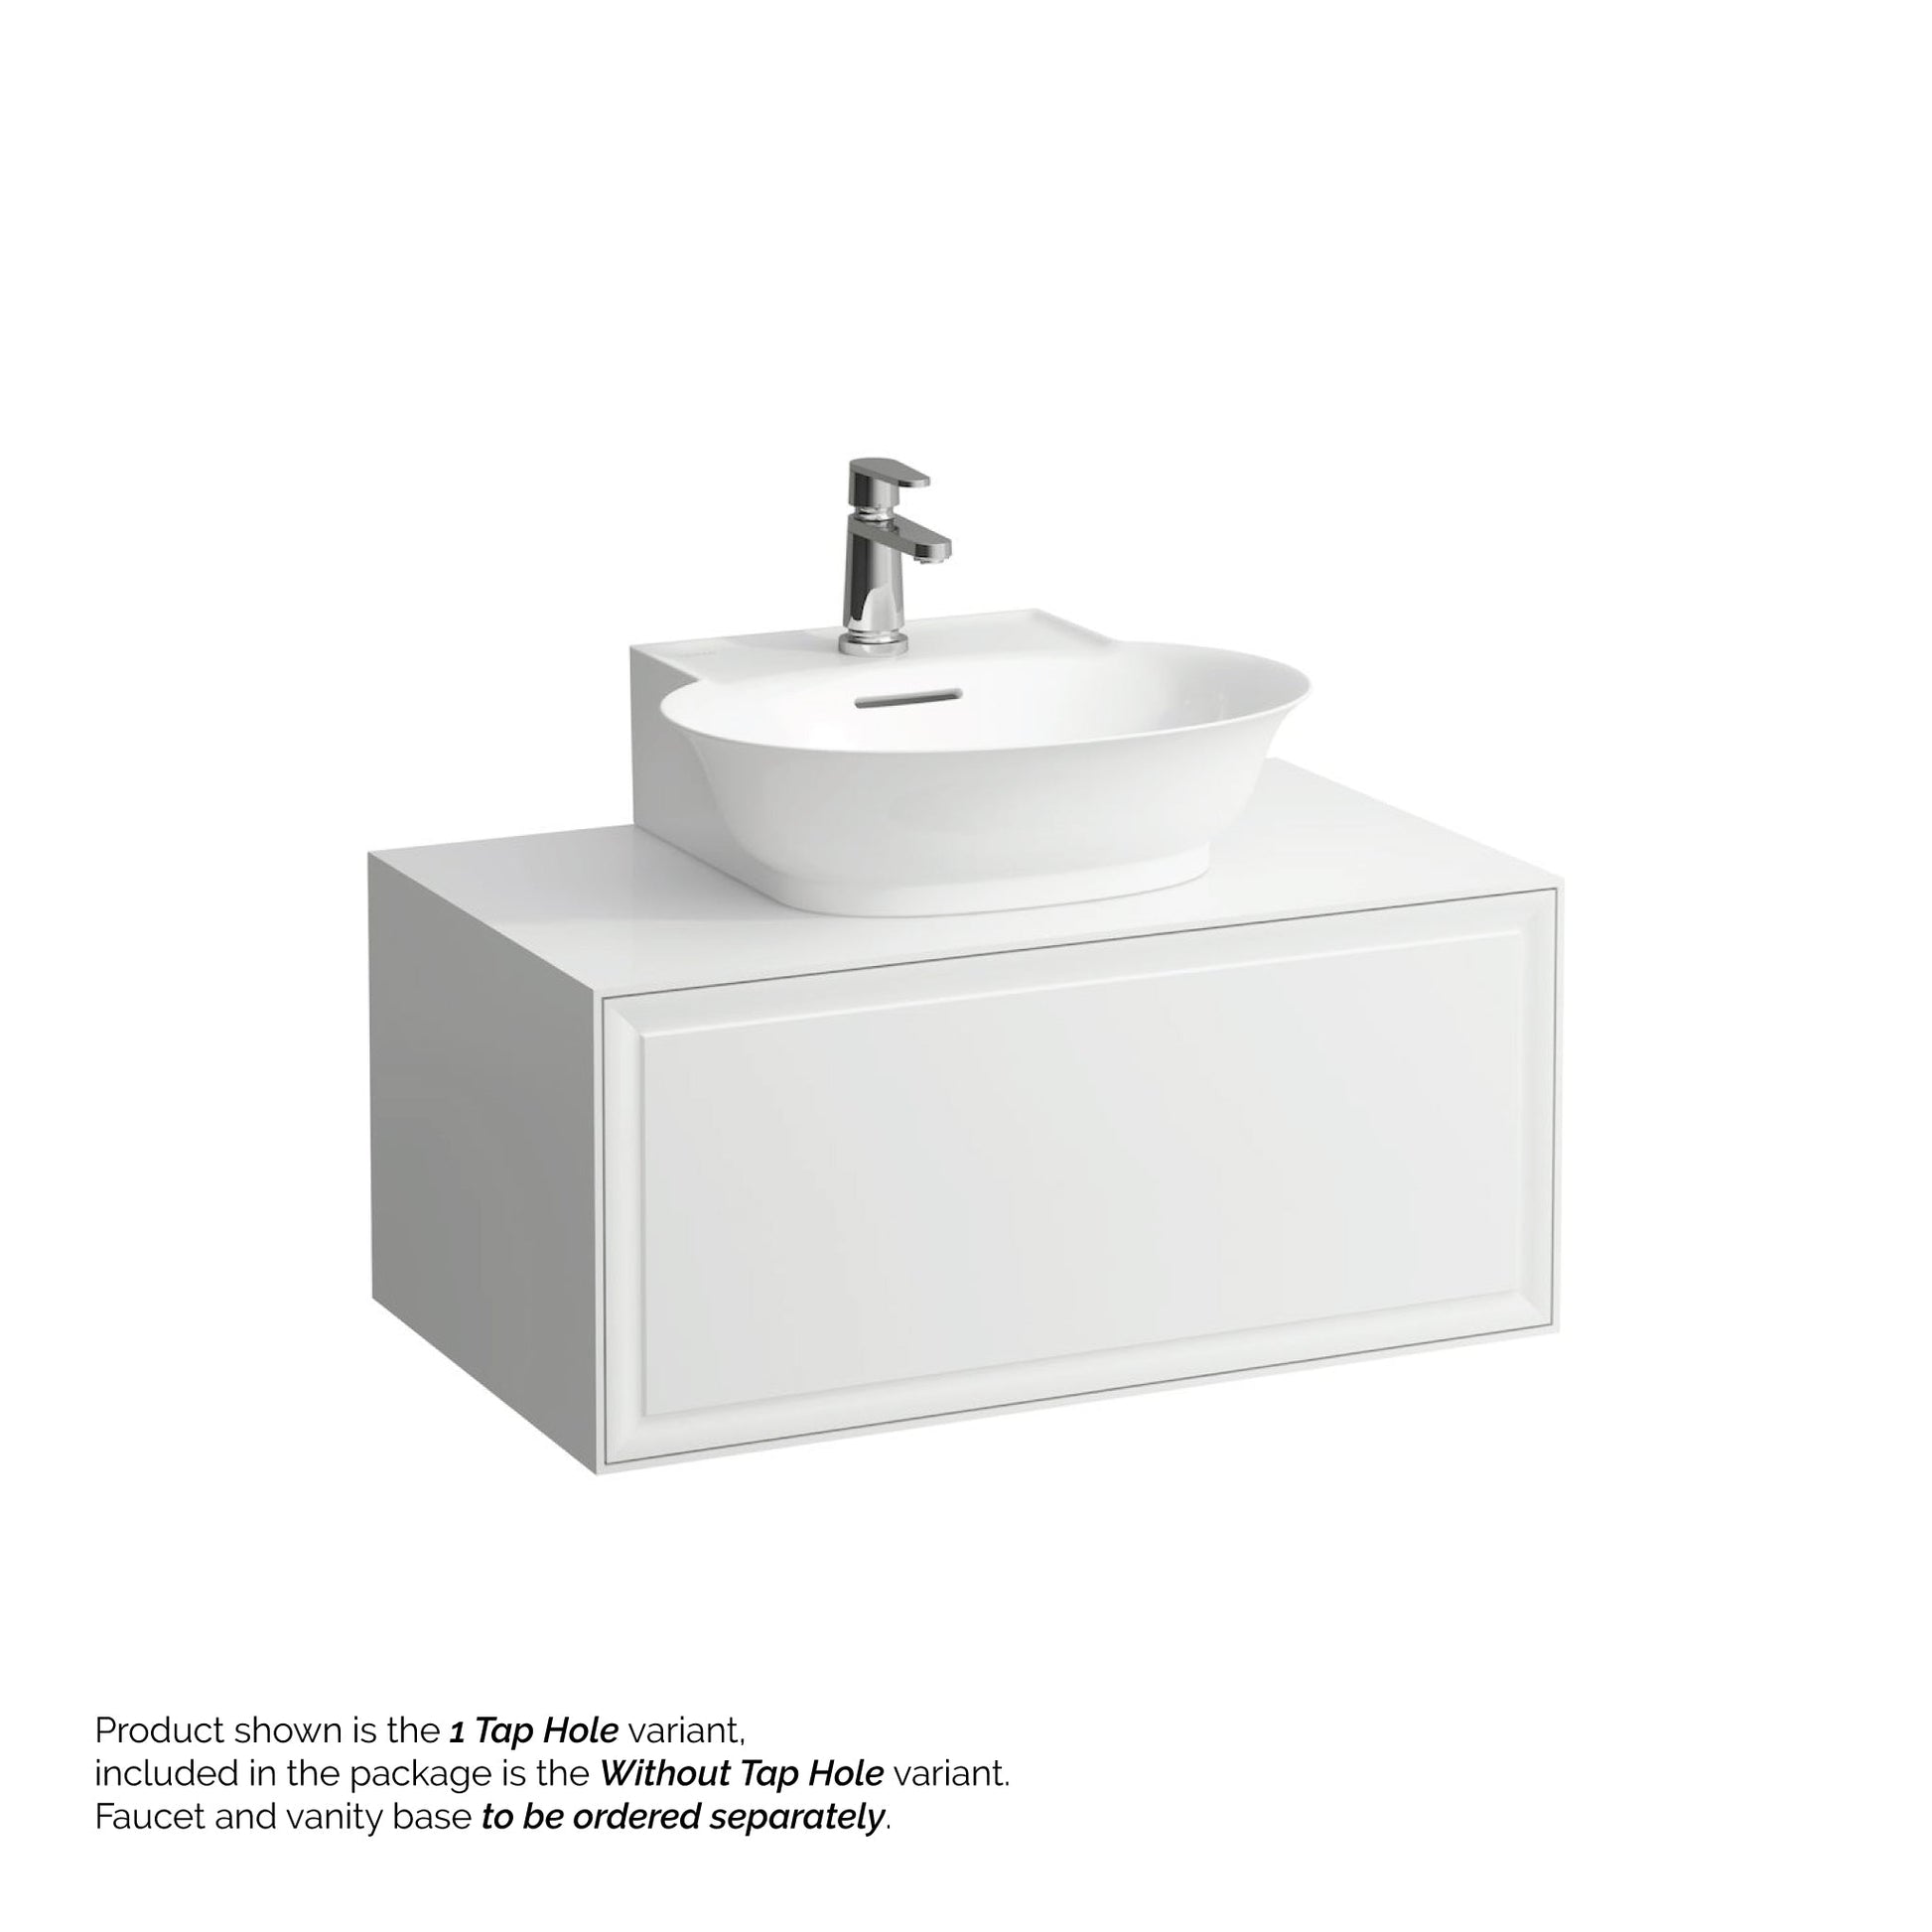 Laufen New Classic 20" x 18" Matte White Ceramic Countertop Bathroom Sink Without Faucet Hole